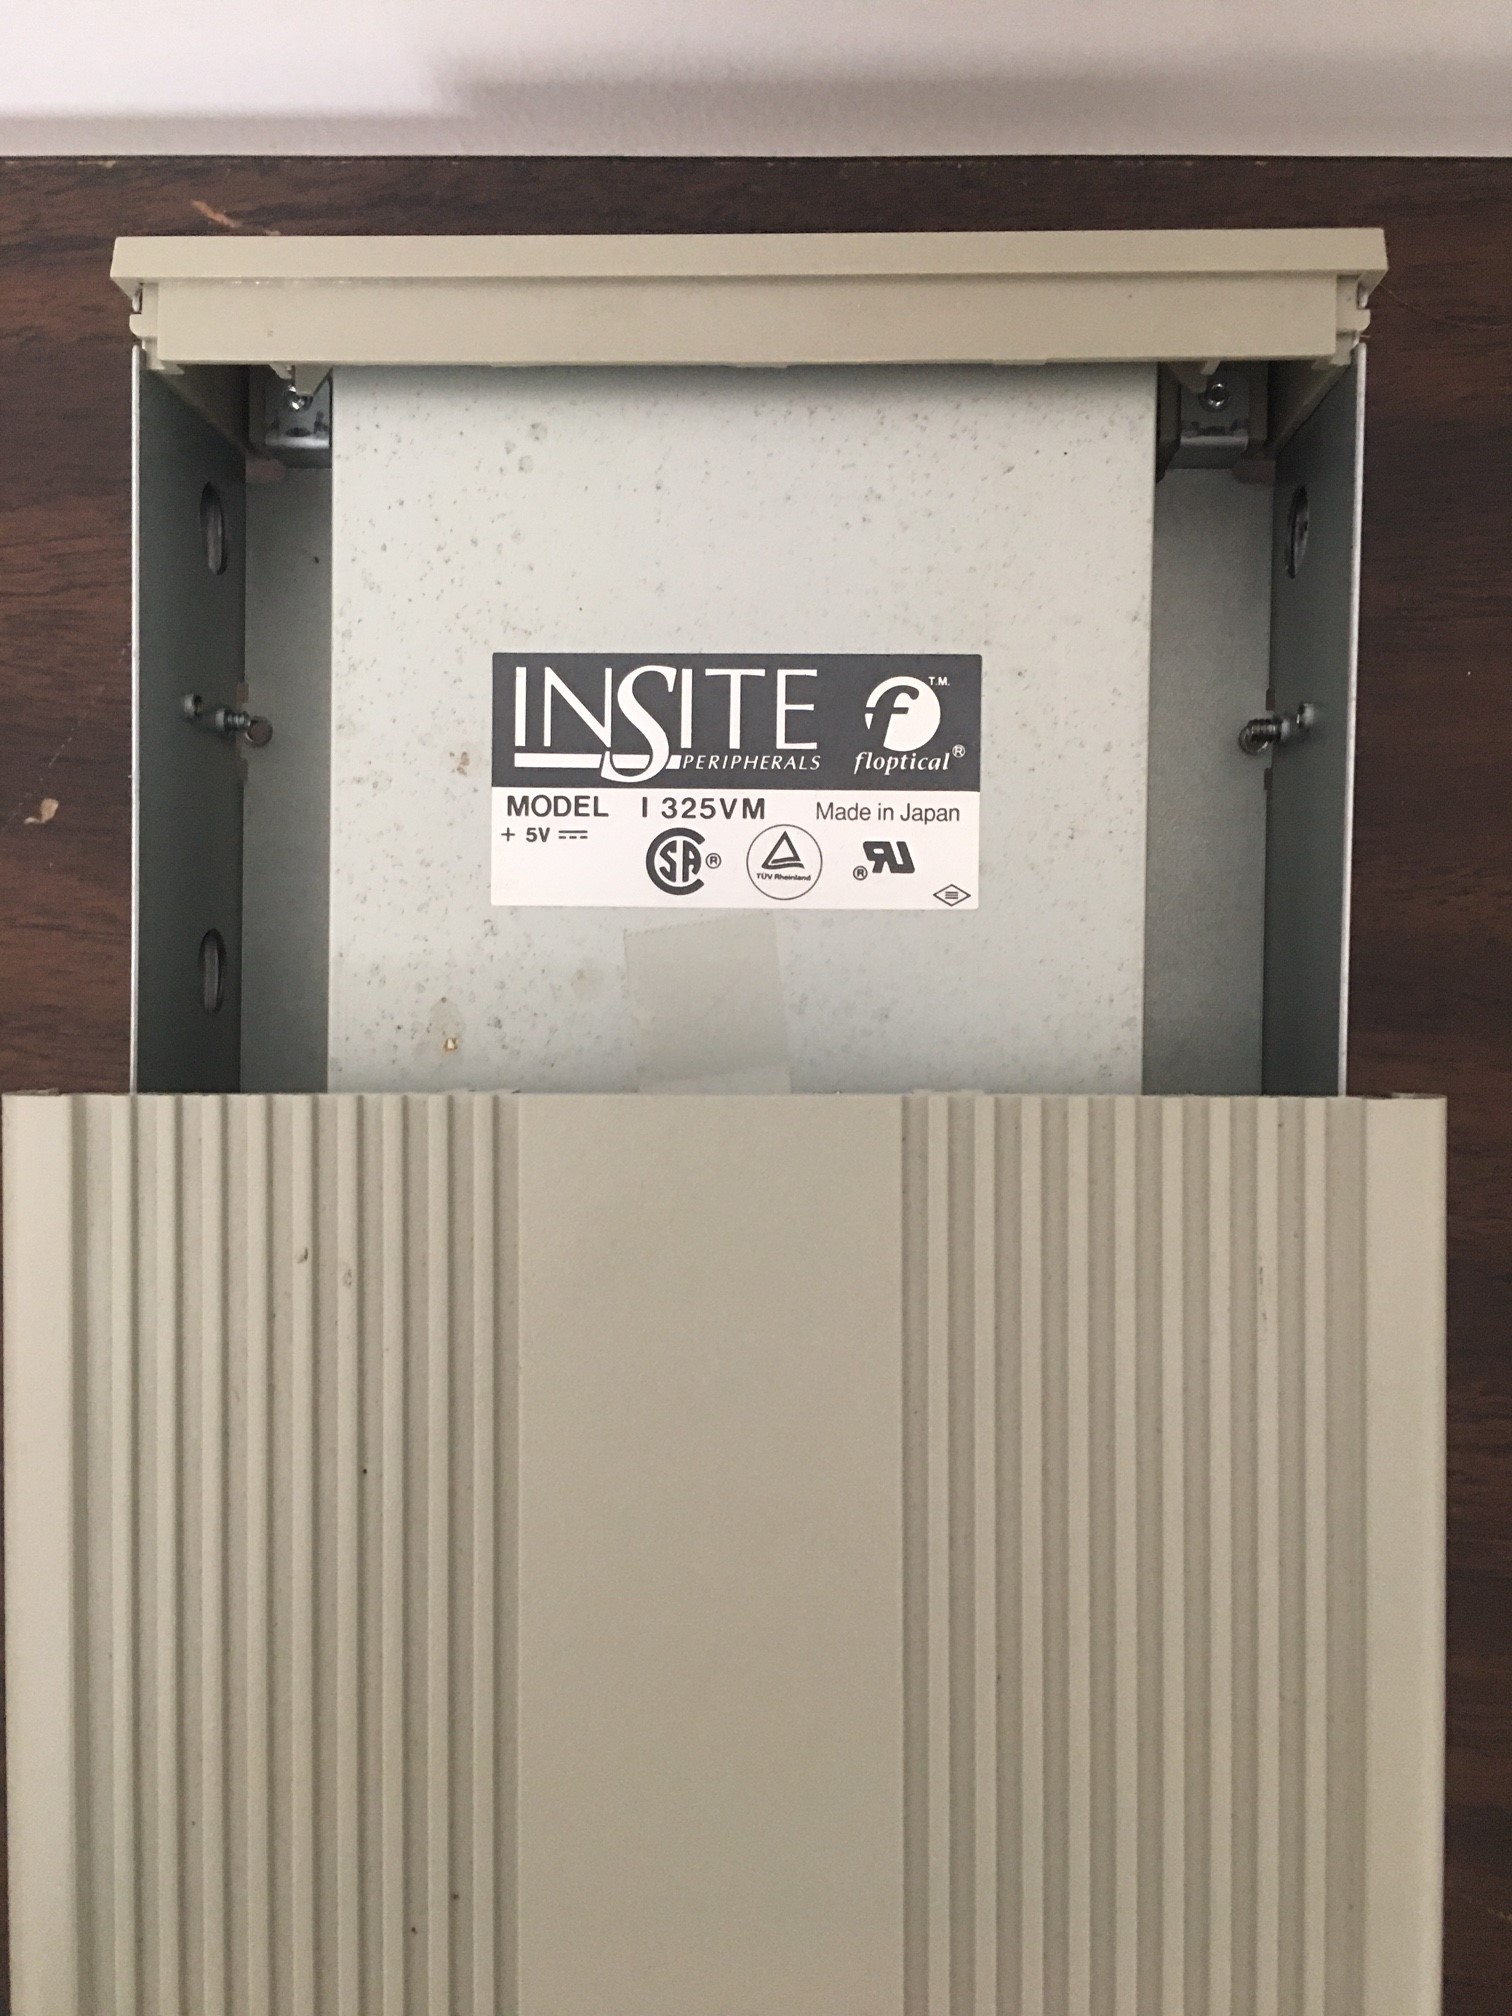 Insite Peripherals I-325VM "Floptical" 3.5" Diskette Drive - Click Image to Close